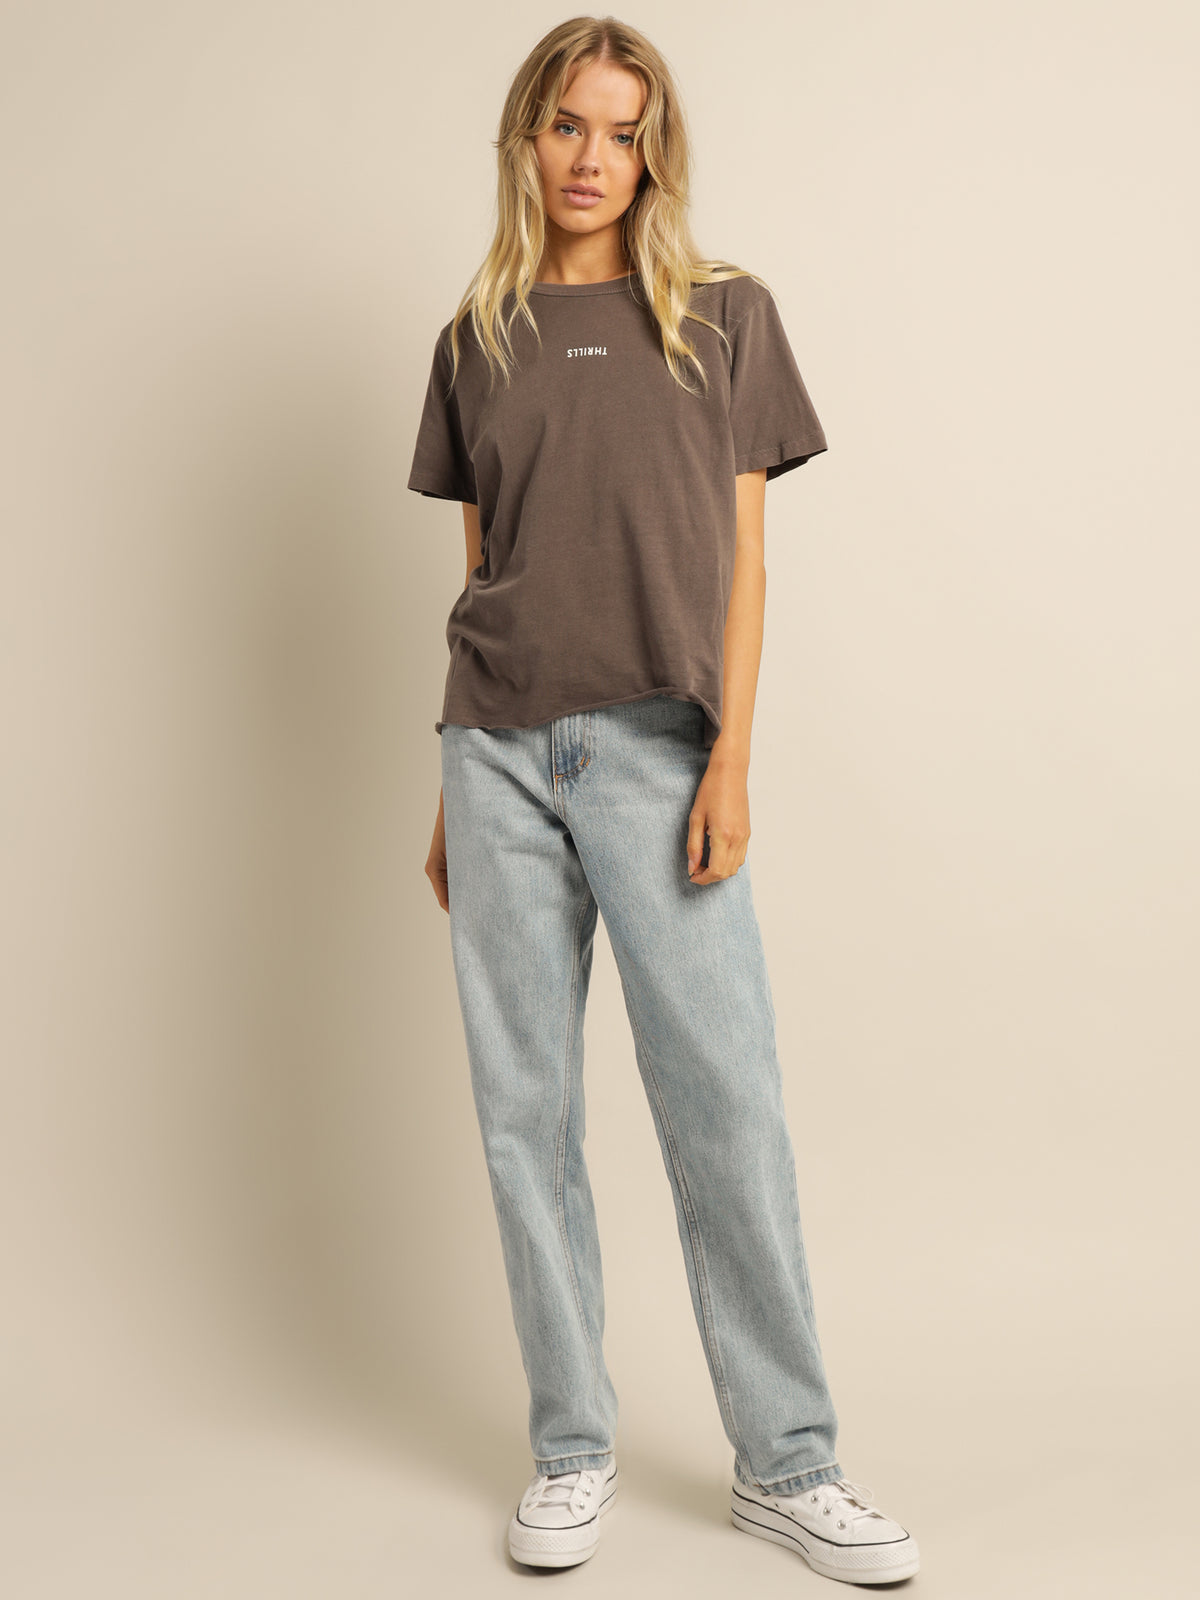 Minimal Thrills Relaxed T-Shirt in Plum